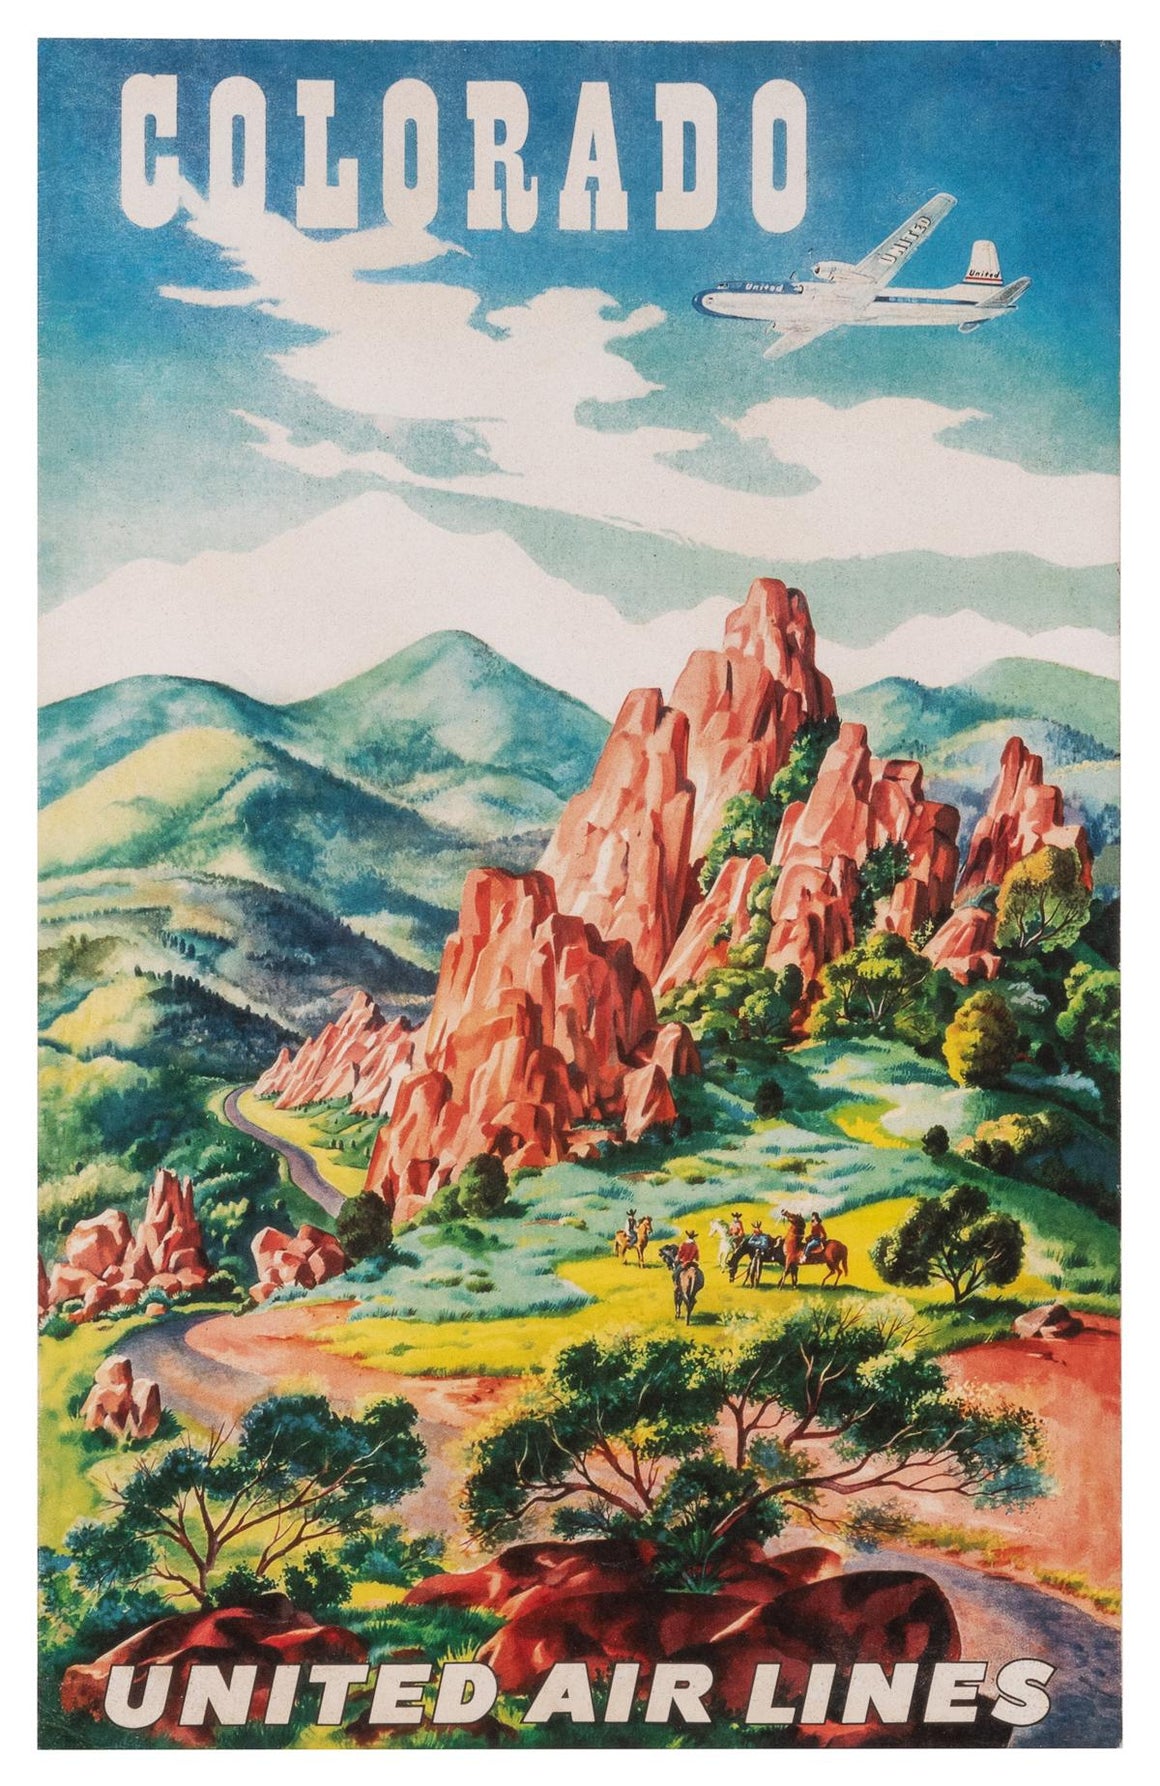 "Colorado" Vintage United Airlines Travel Poster by Joseph Feher, 1950s